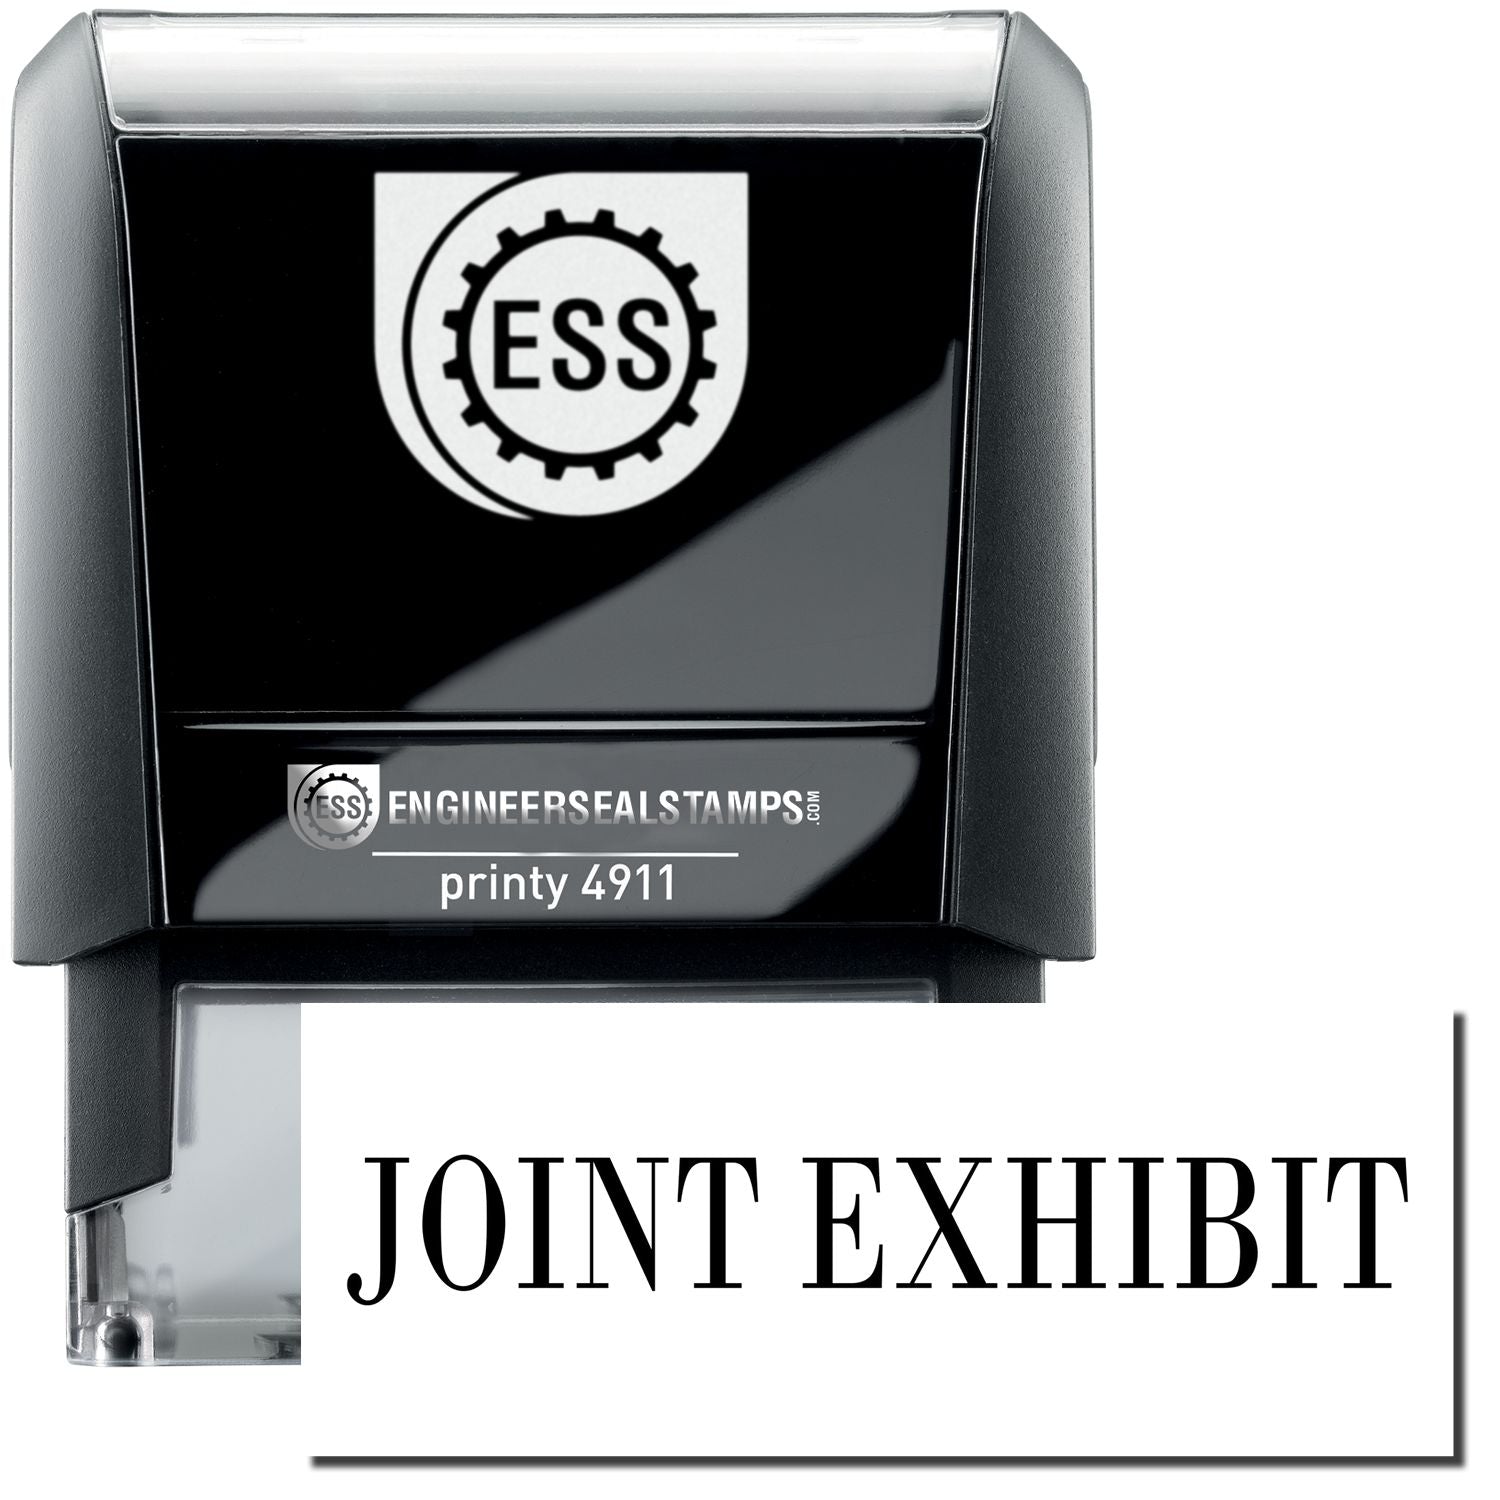 A self-inking stamp with a stamped image showing how the text "JOINT EXHIBIT" is displayed after stamping.